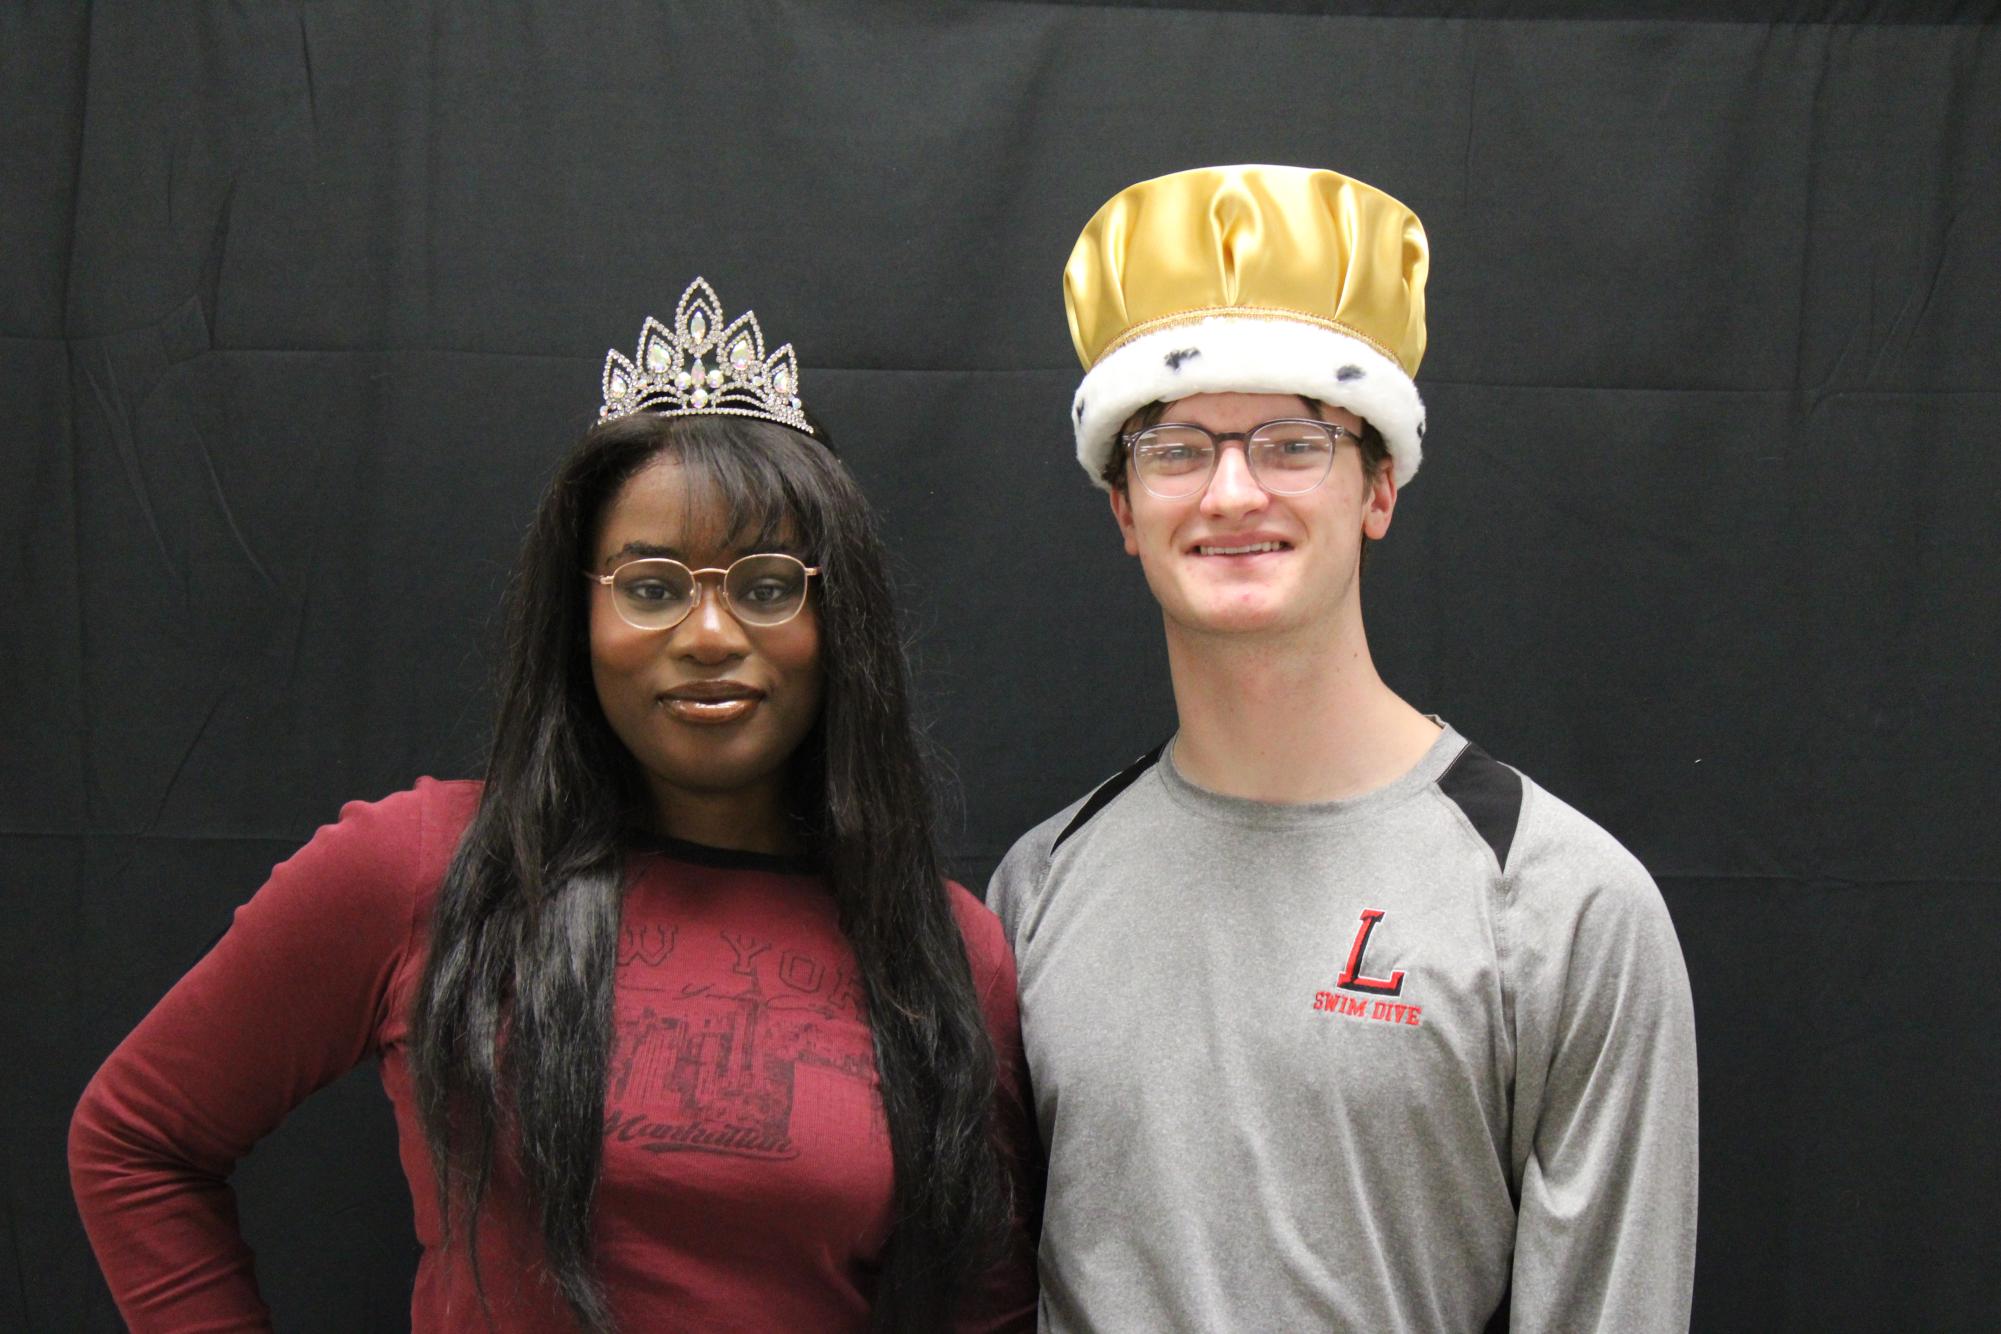 Taking a picture with their crowns, seniors Jake Fincher and Esther BienAiem pose for a photo. 